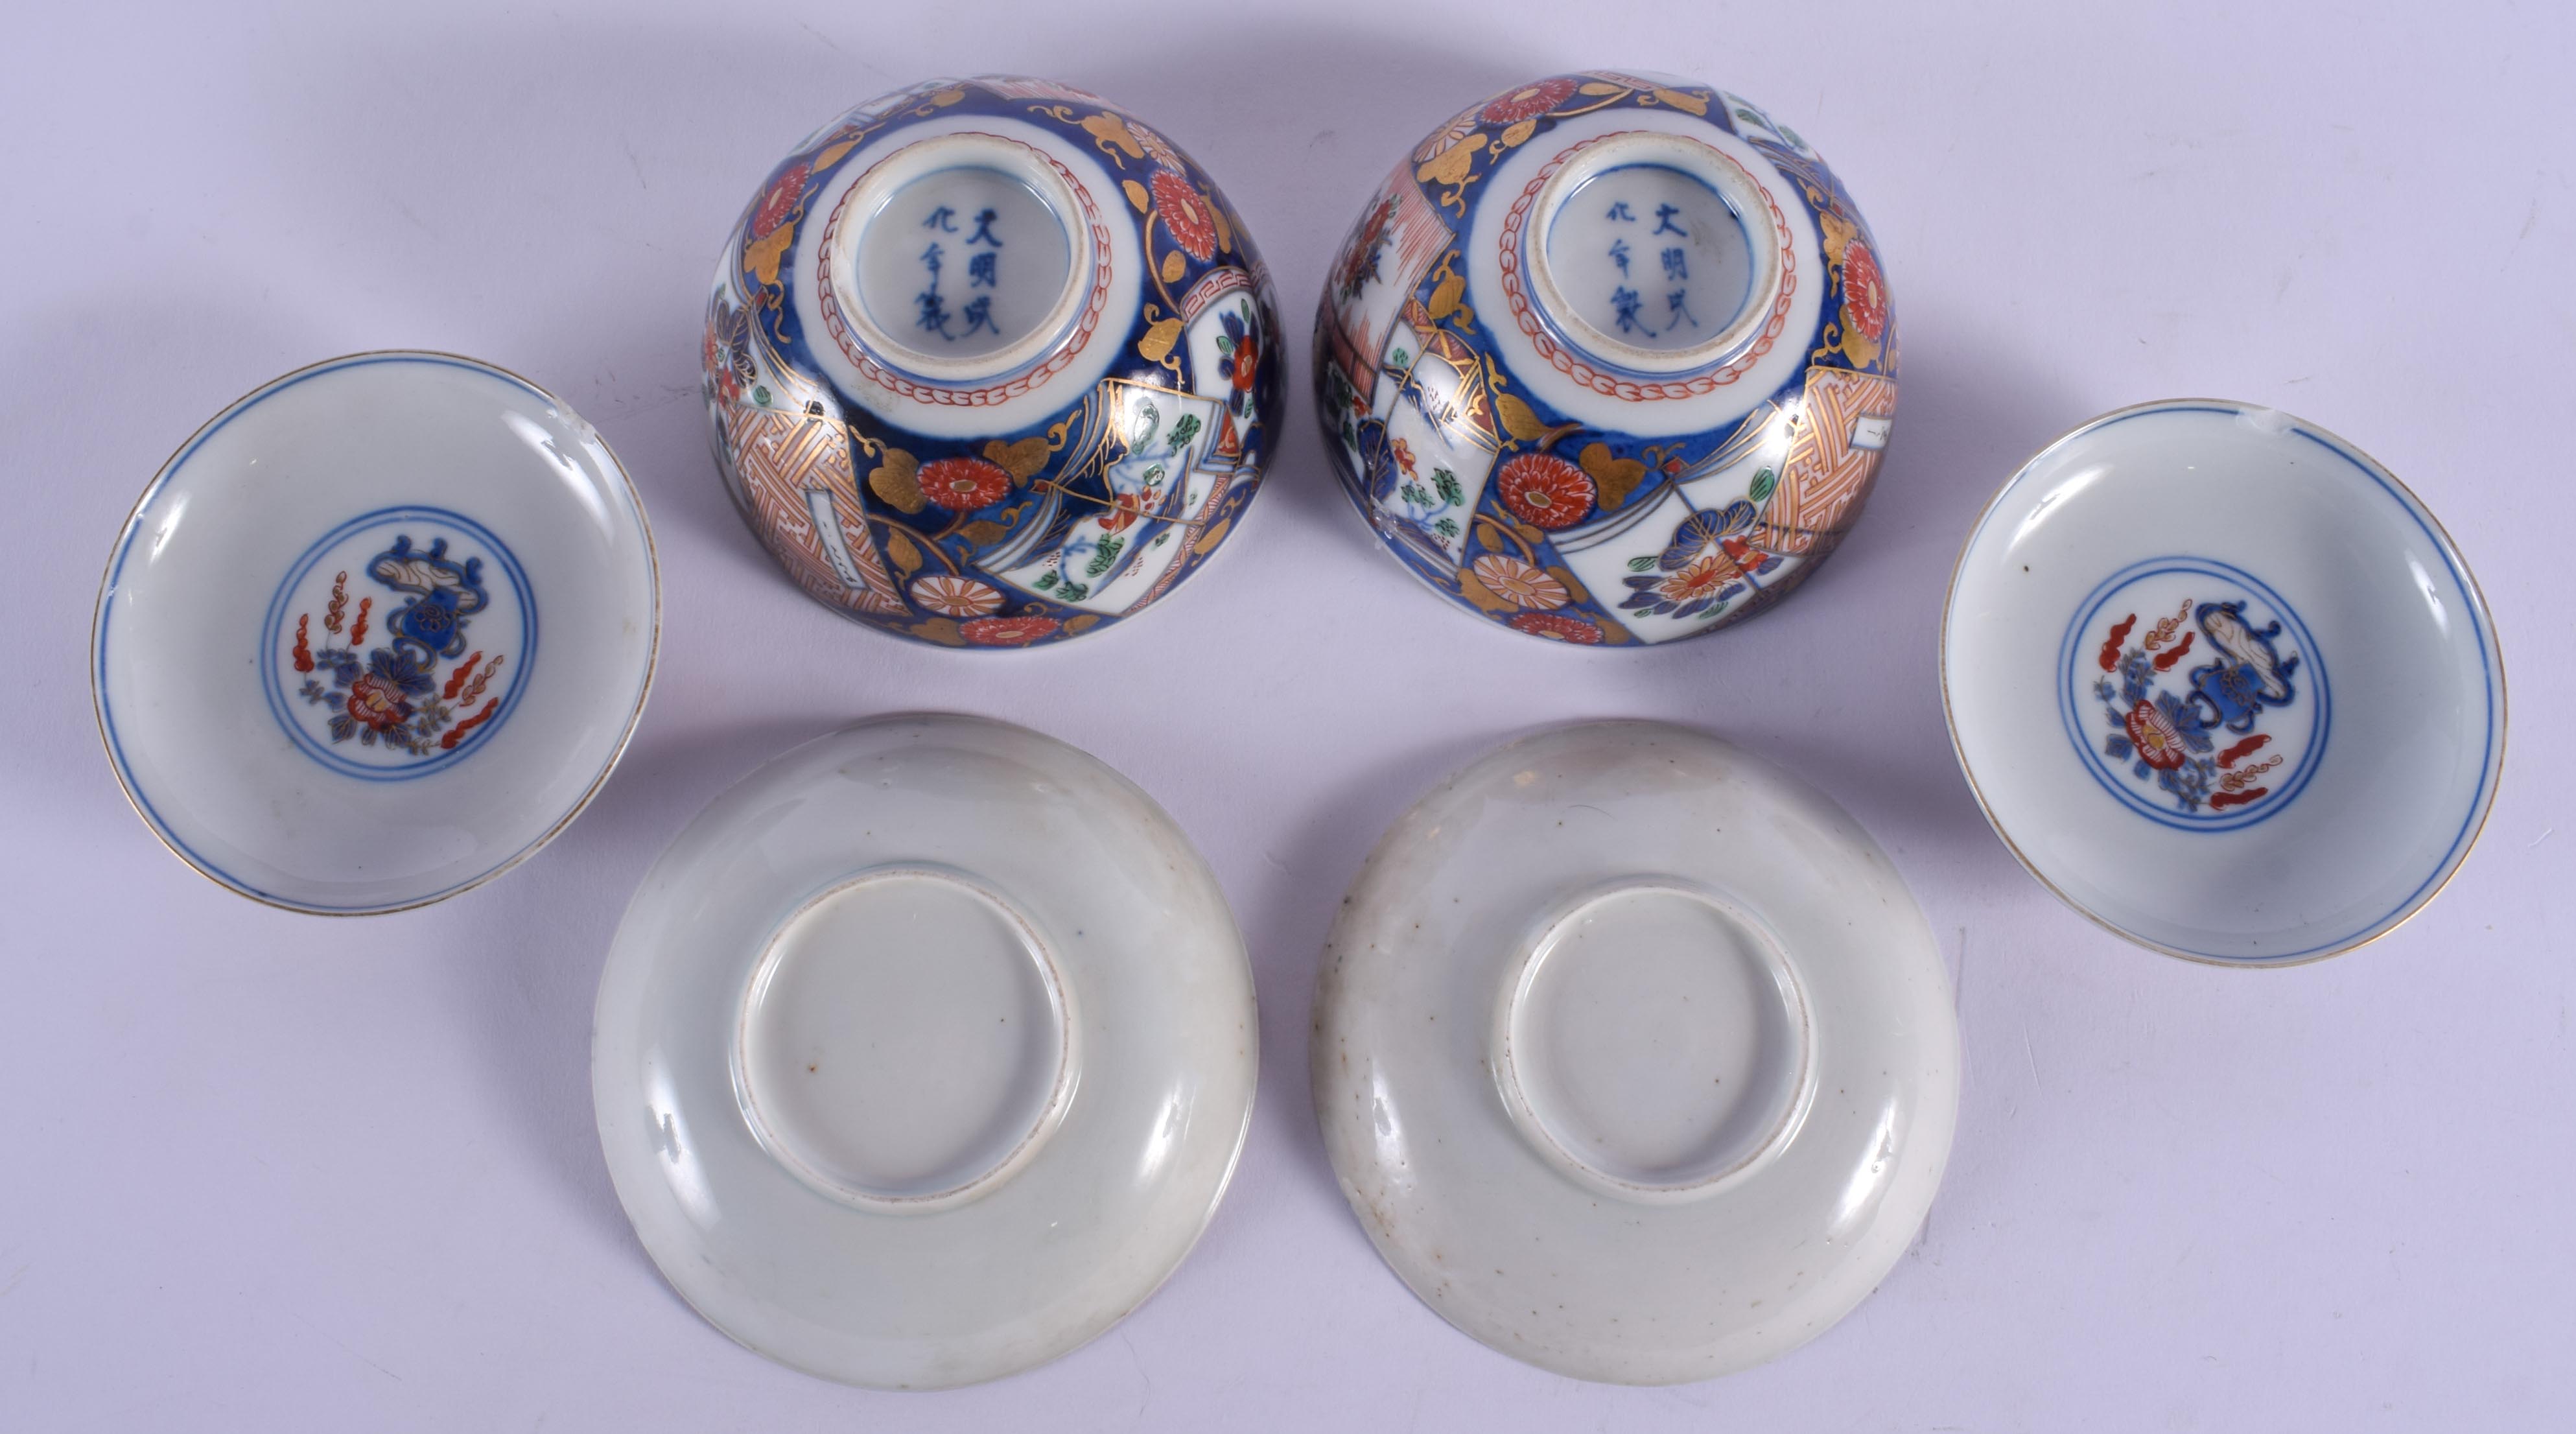 A PAIR OF 19TH CENTURY JAPANESE MEIJI PERIOD IMARI BOWLS AND COVERS painted with floral sprays. 10 c - Image 4 of 4